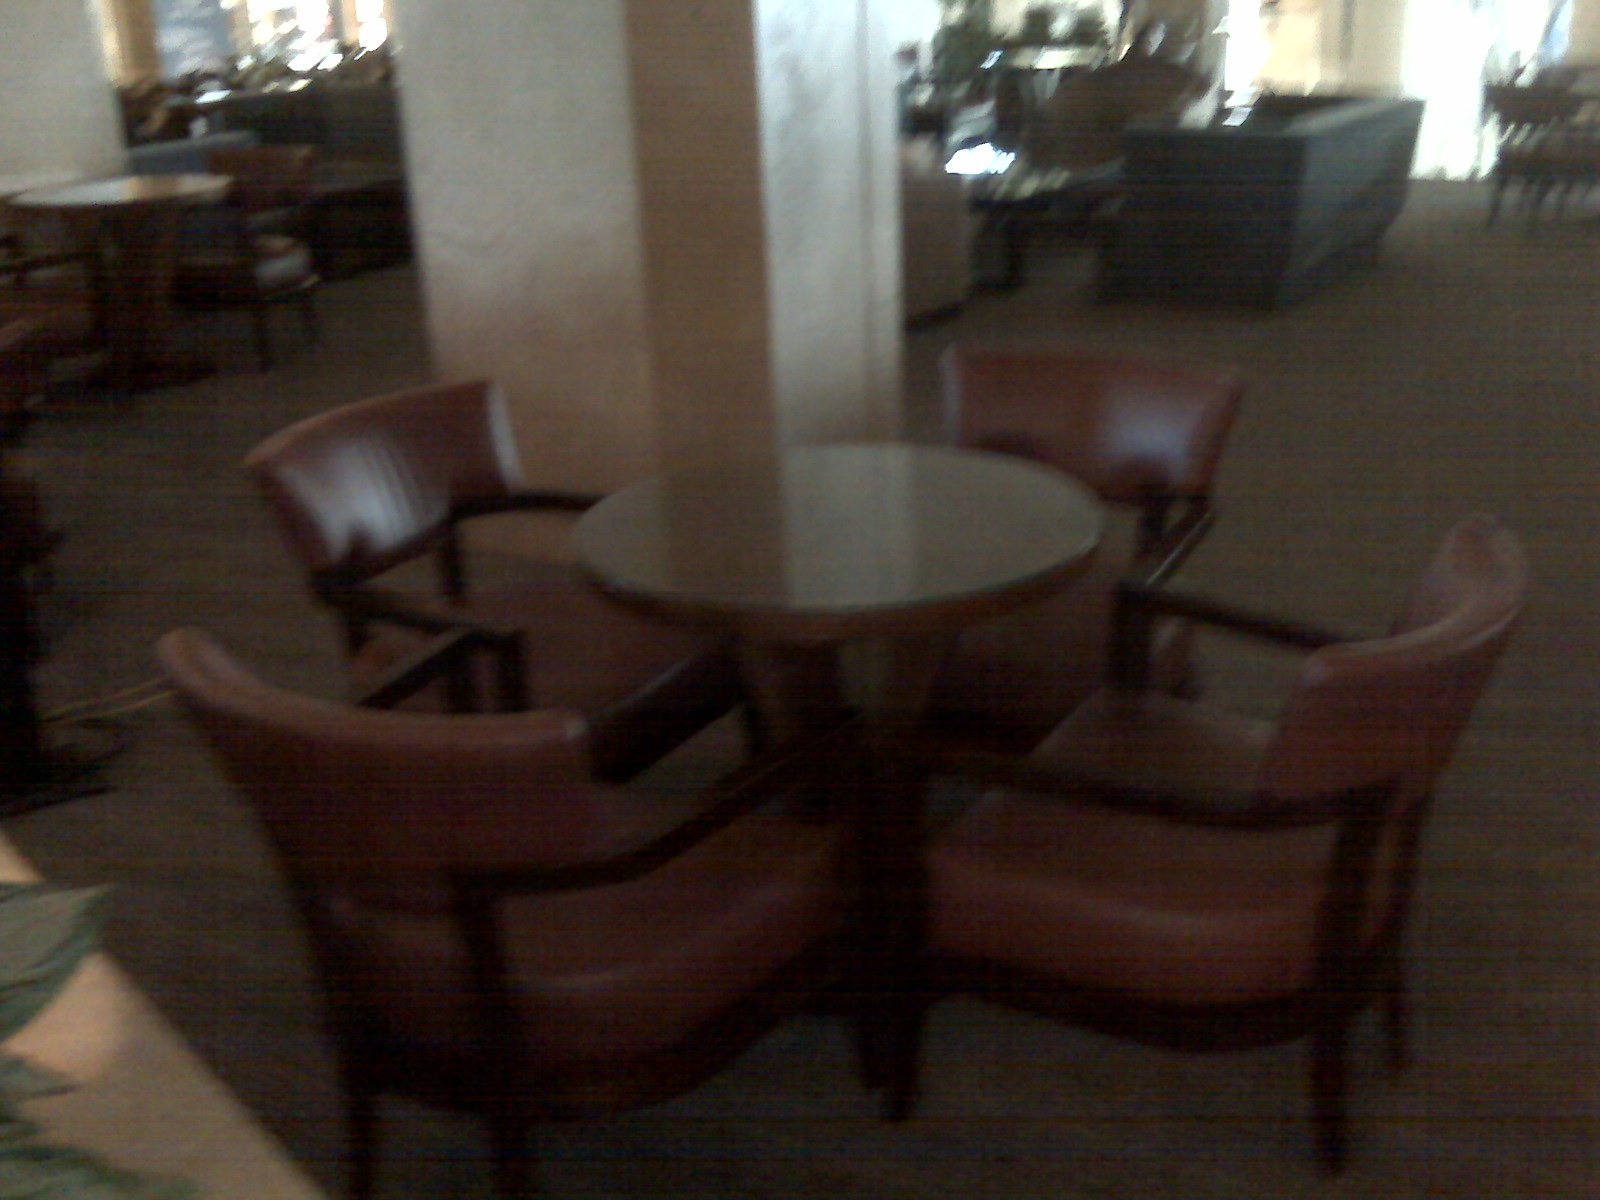 Whitney Houston, The Queen of Pop: The Table Where Whitney Houston Sat With Her Daughter and an Un-named Tall Man Before Heading Up to Her Room at Approximately 2:00PM at Beverly Hills Hotel Where She Was Found Dead in Her Hotel Room, Luxury Suite #434.